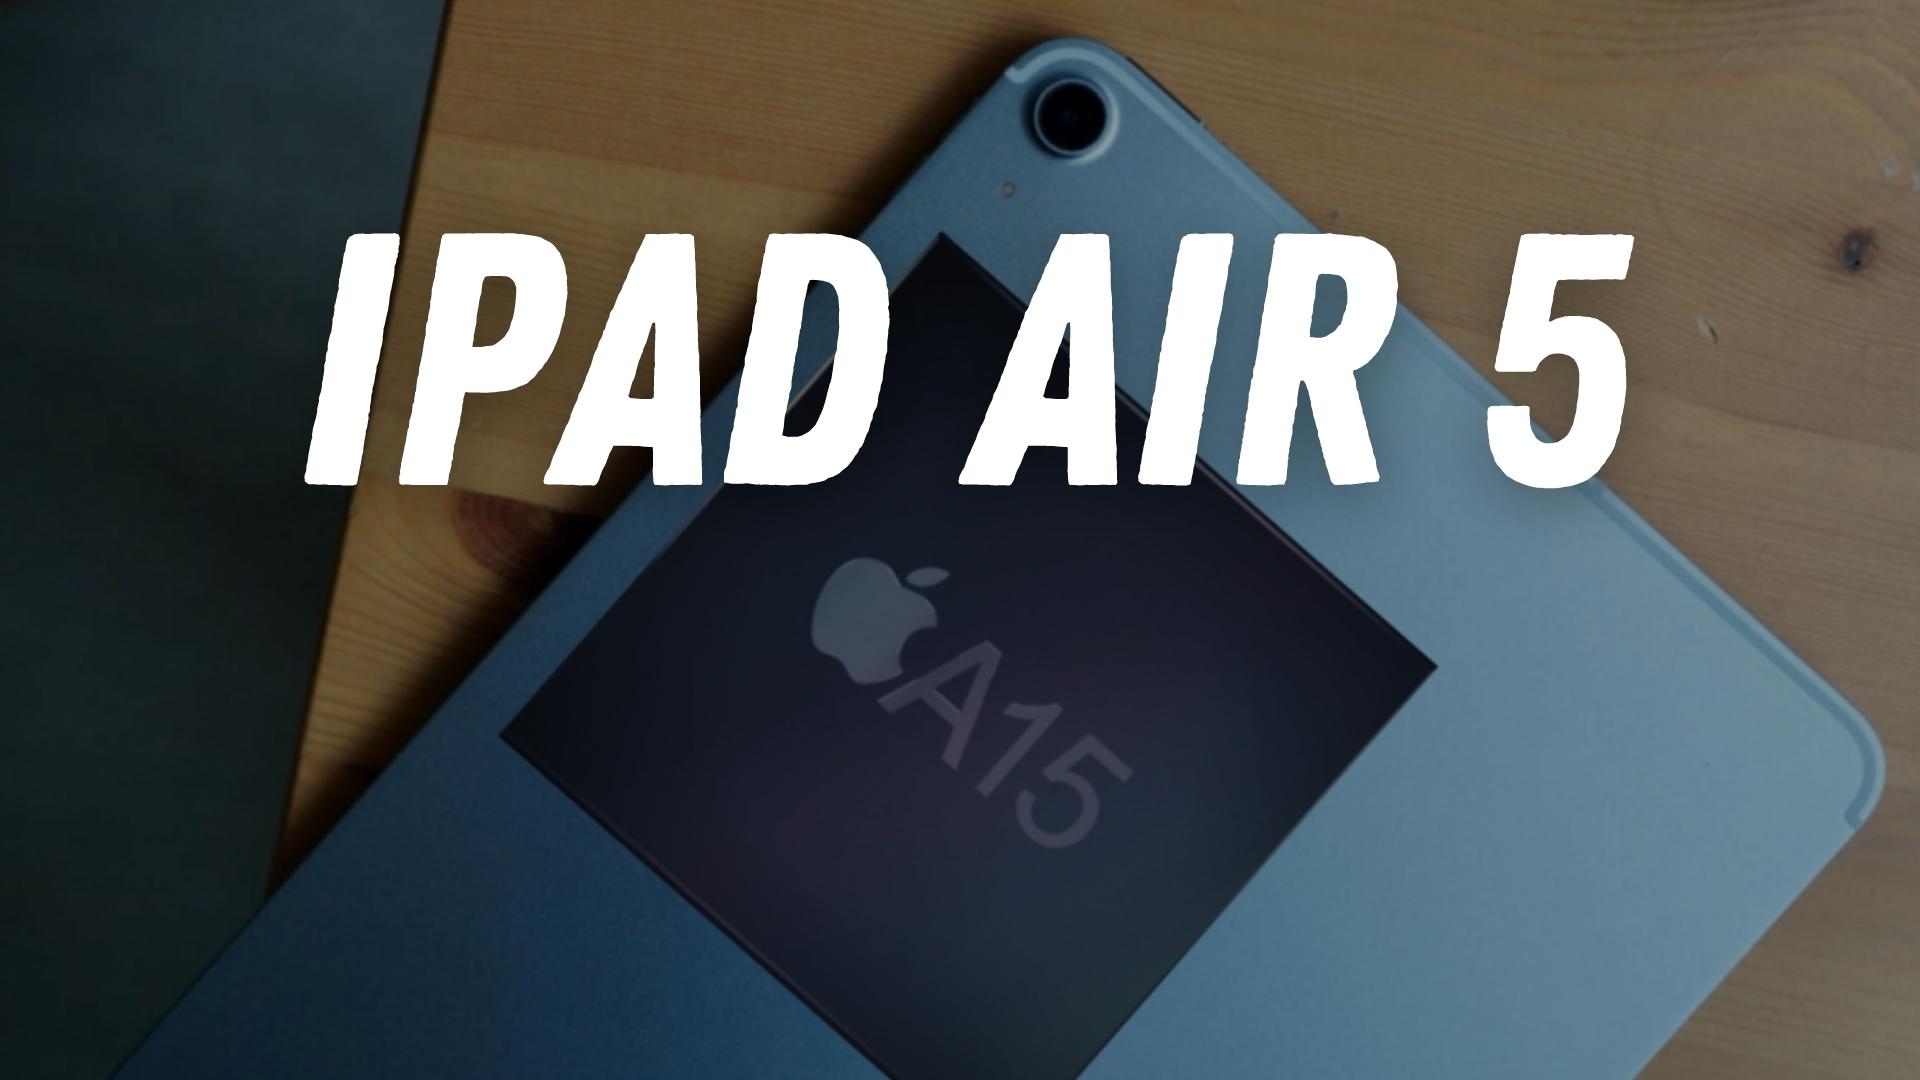 Apple iPad Air 5 Roundup A15 Bionic chip, 12MP ultra wide front cam & more